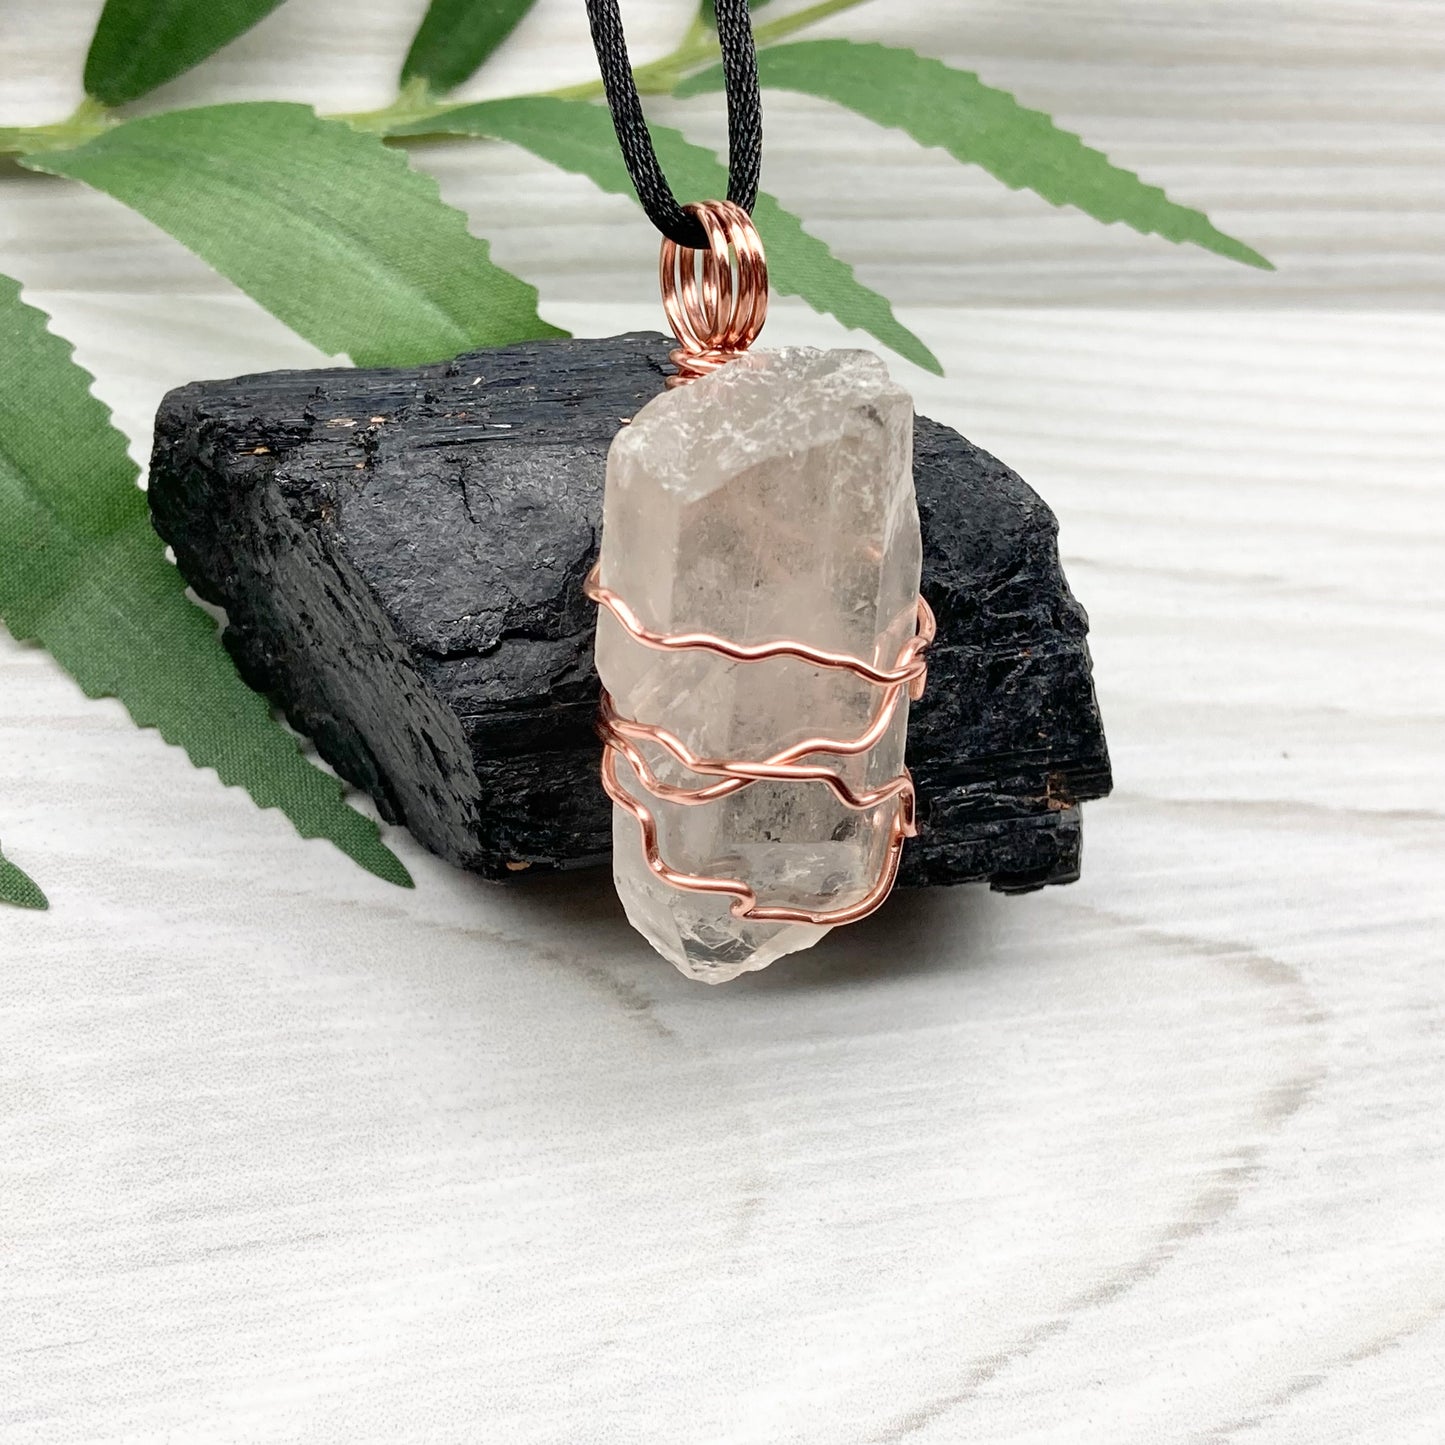 Raw Clear Quartz Crystal Necklace. Copper Wire Wrapped Stone Pendant. Comes On A Black Necklace. Handcrafted New Age Jewelry.